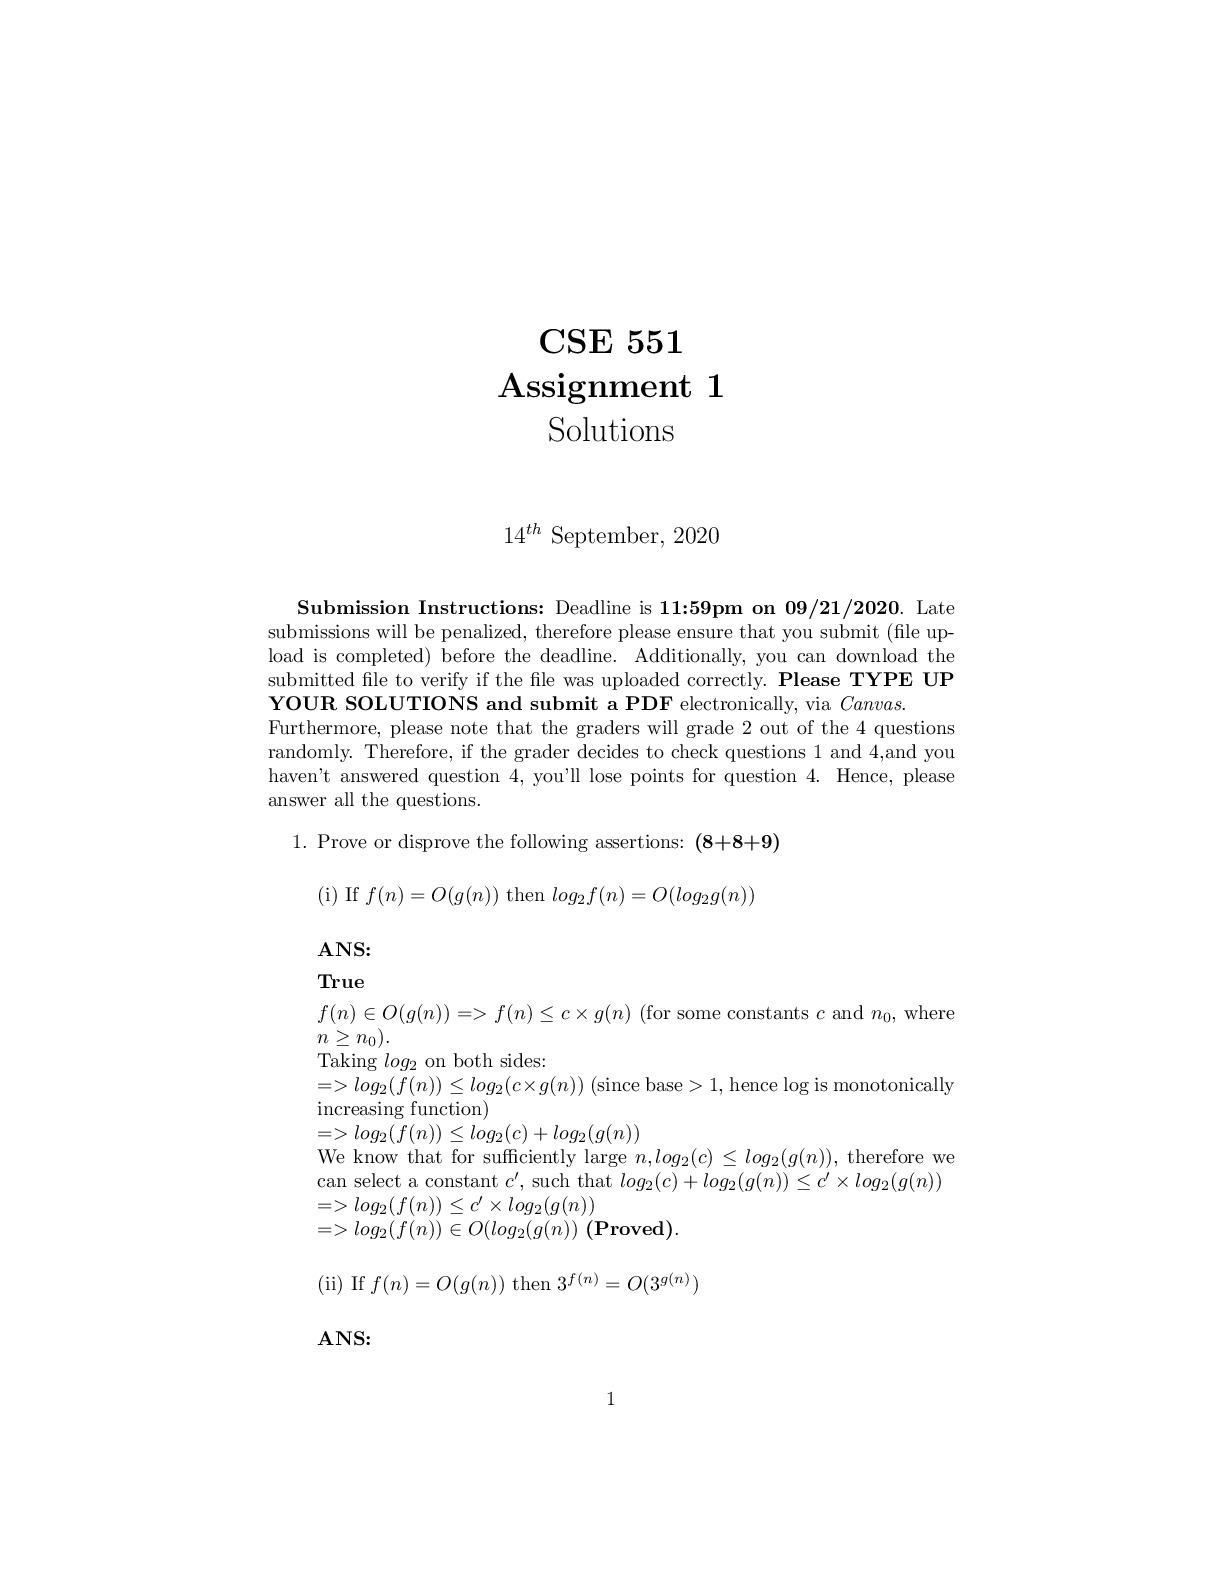 Assignment_1_Solutions_CSE551_Fall_2020.pdf